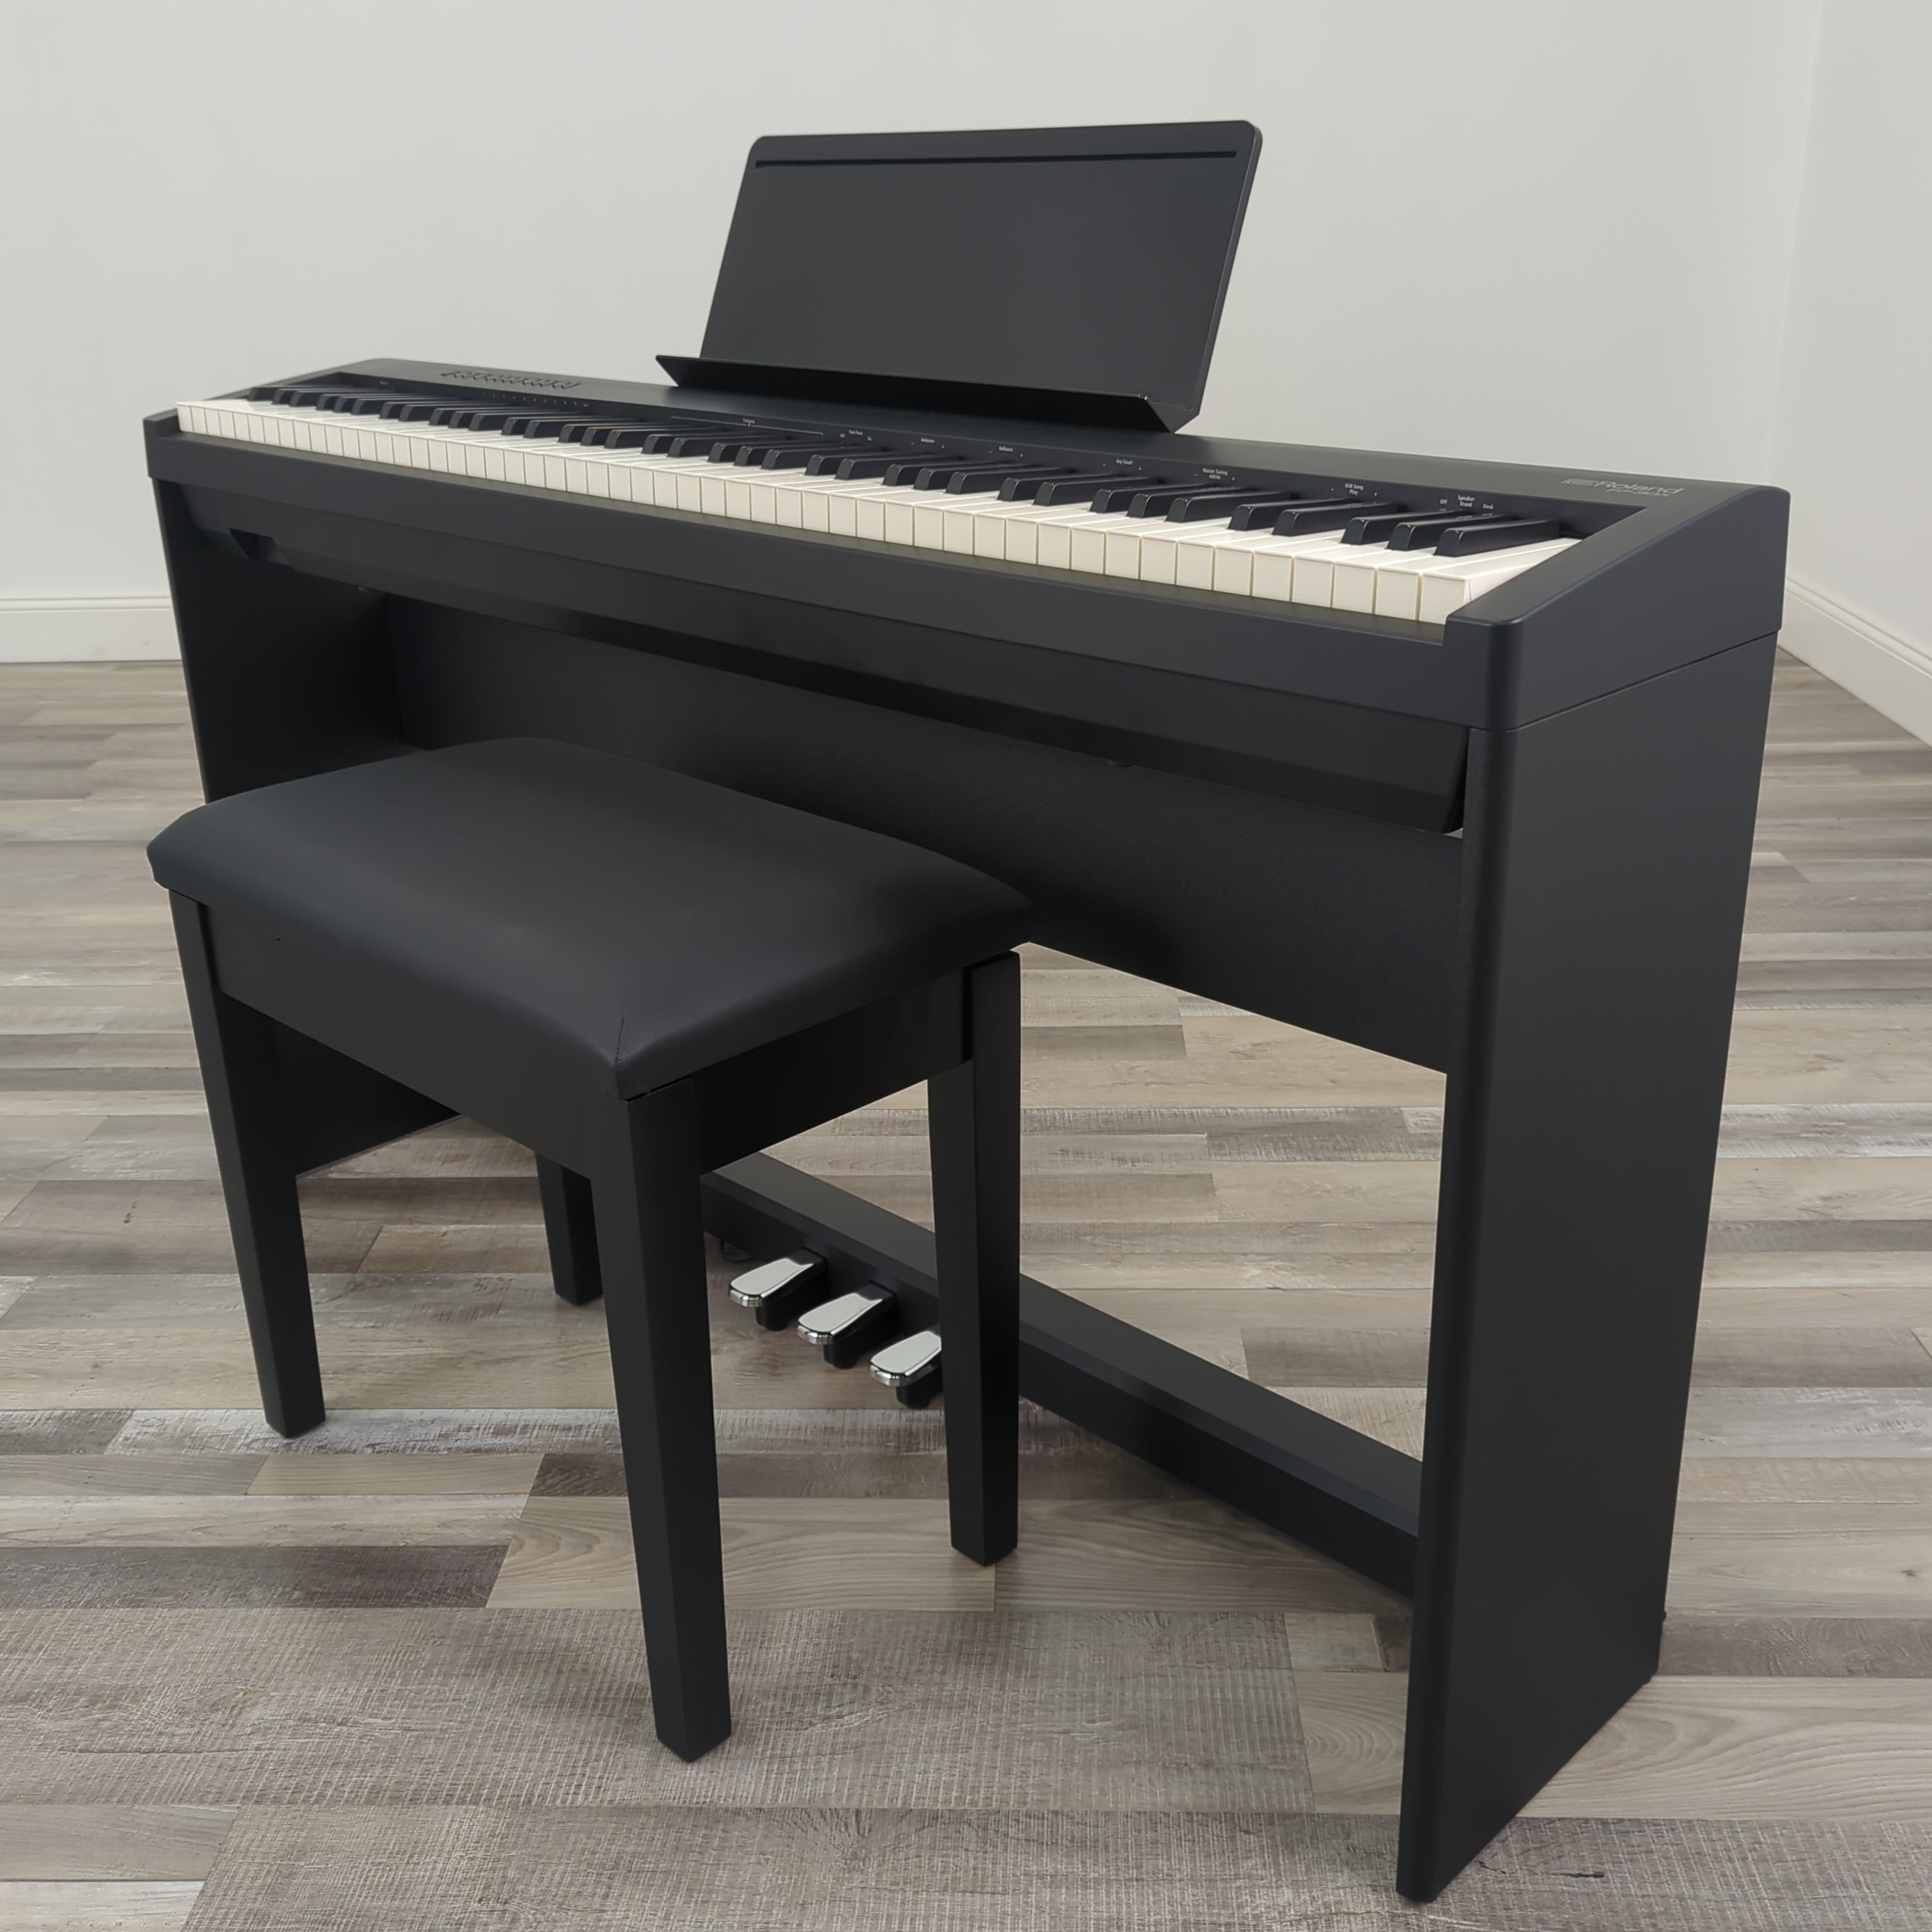 Roland FP-30X Digital Piano with Speakers (Black)